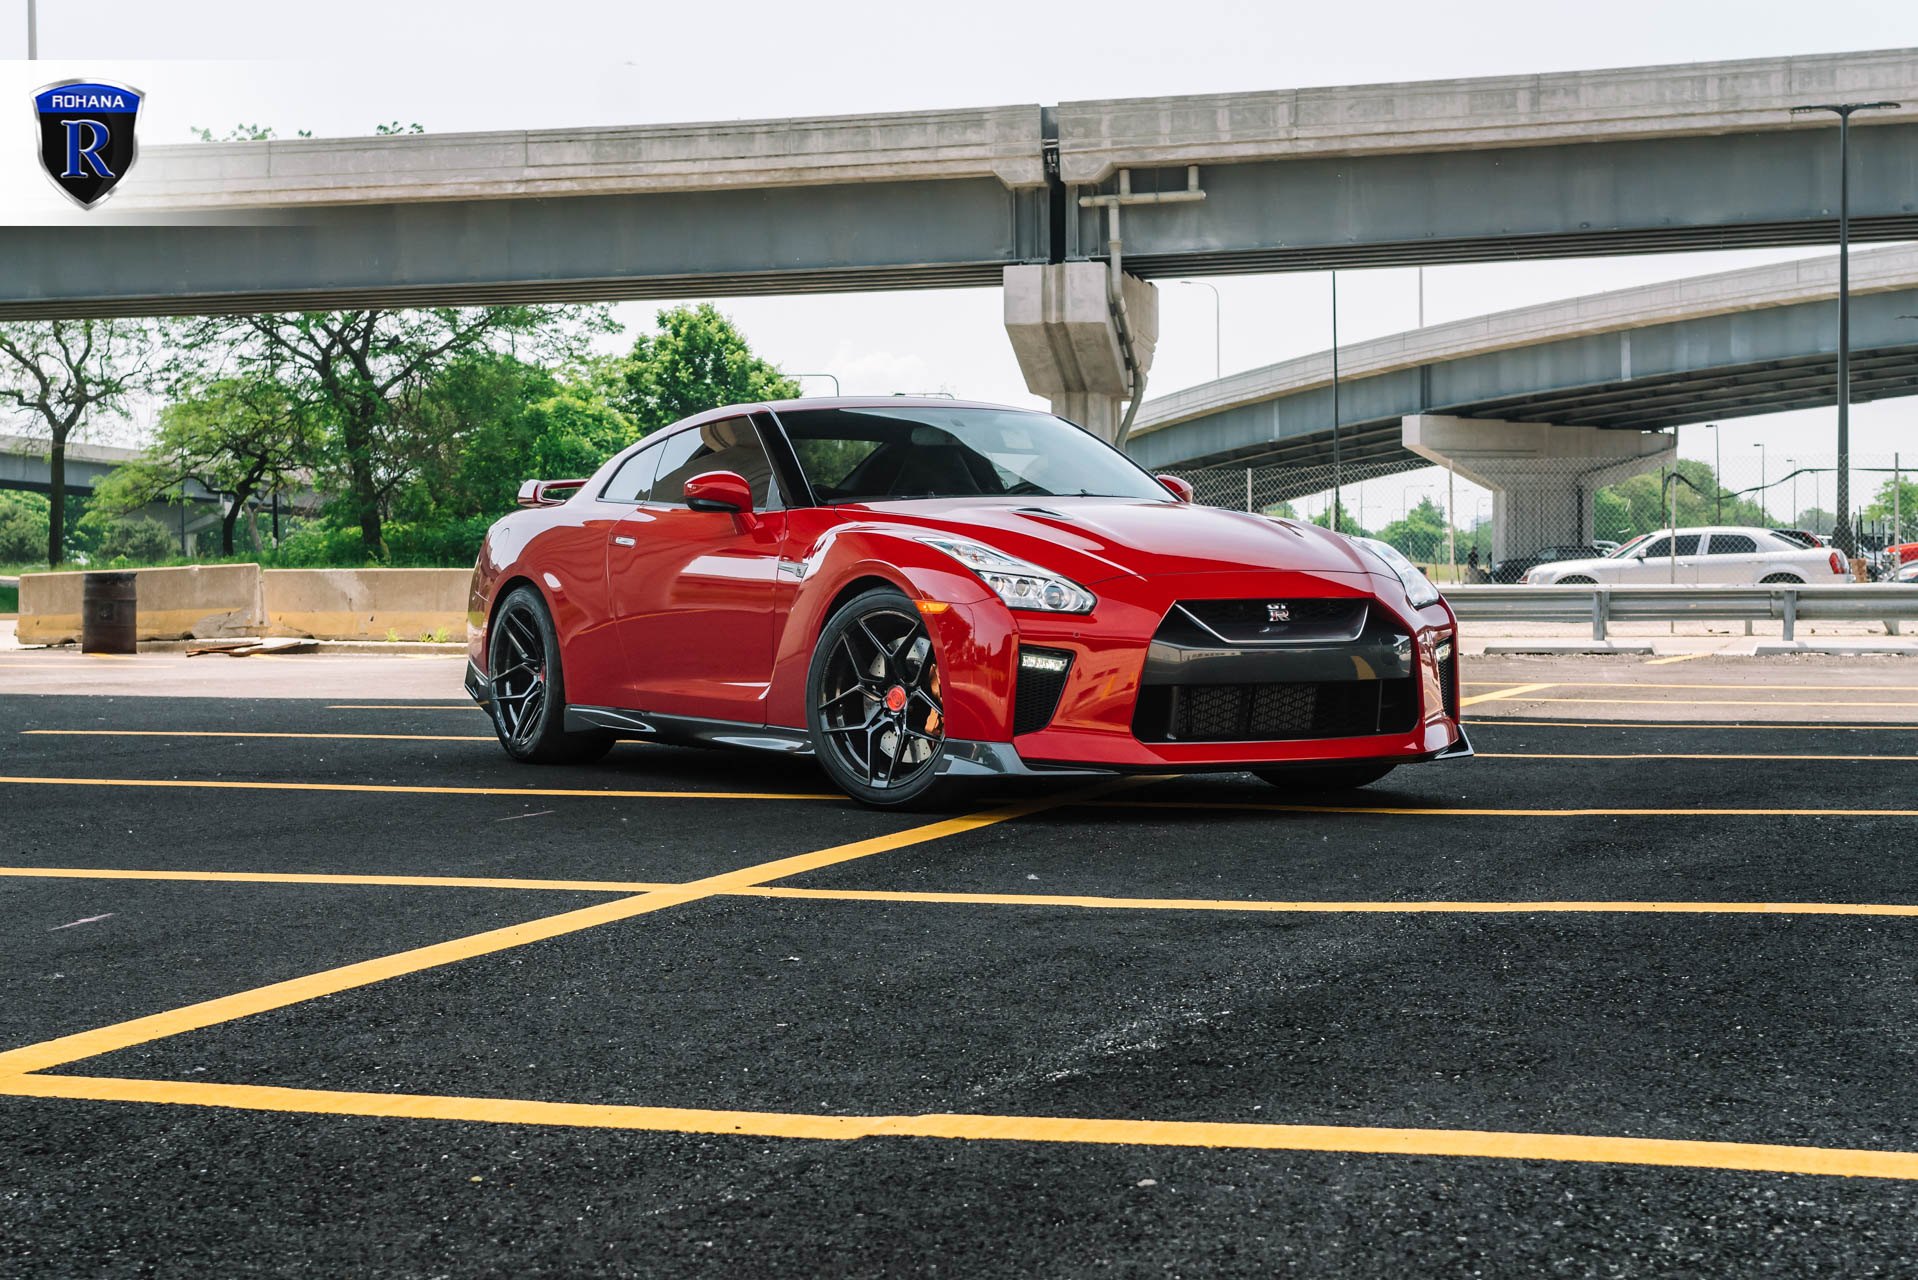 Red Nissan GT-R with Crystal Clear Headlights - Photo by Rohana Wheels